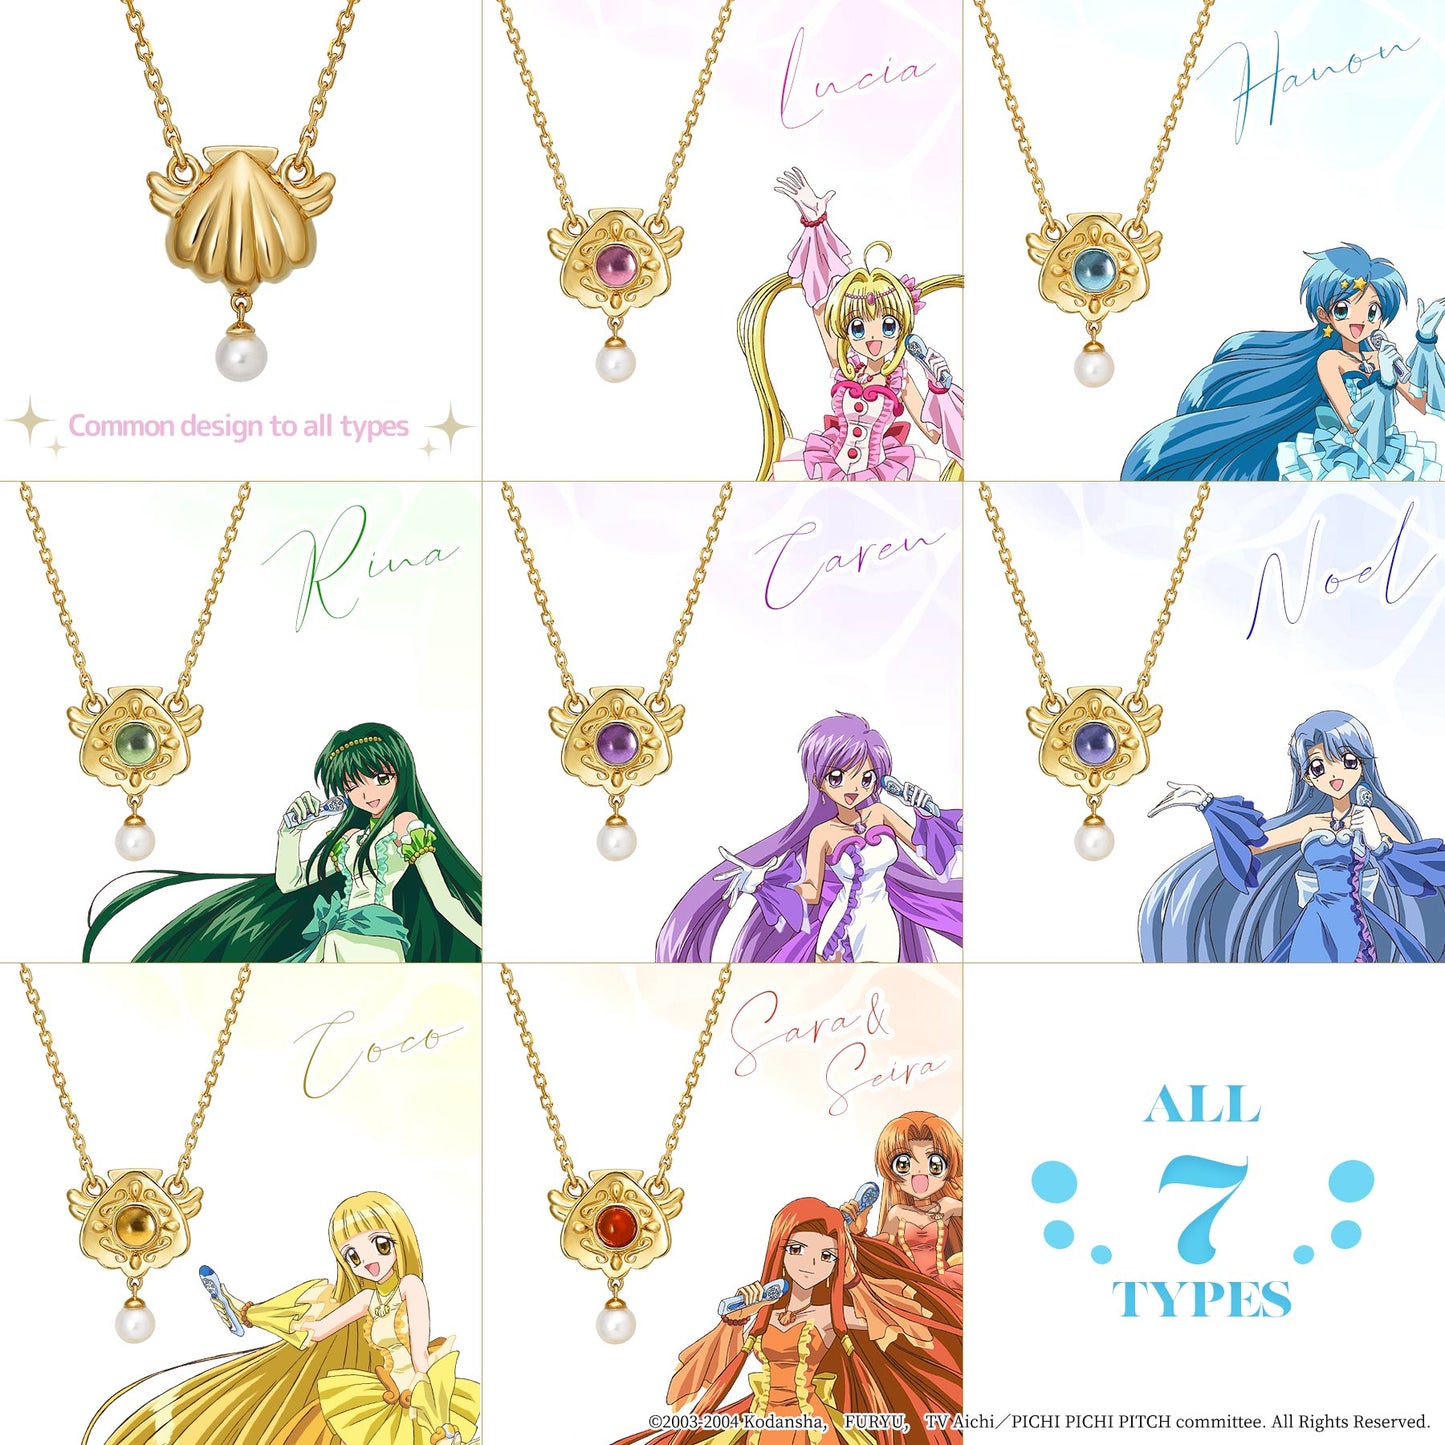 Mermaid Melody Pichi Pichi Pitch - Reversible Necklace (Coco) - All Characters